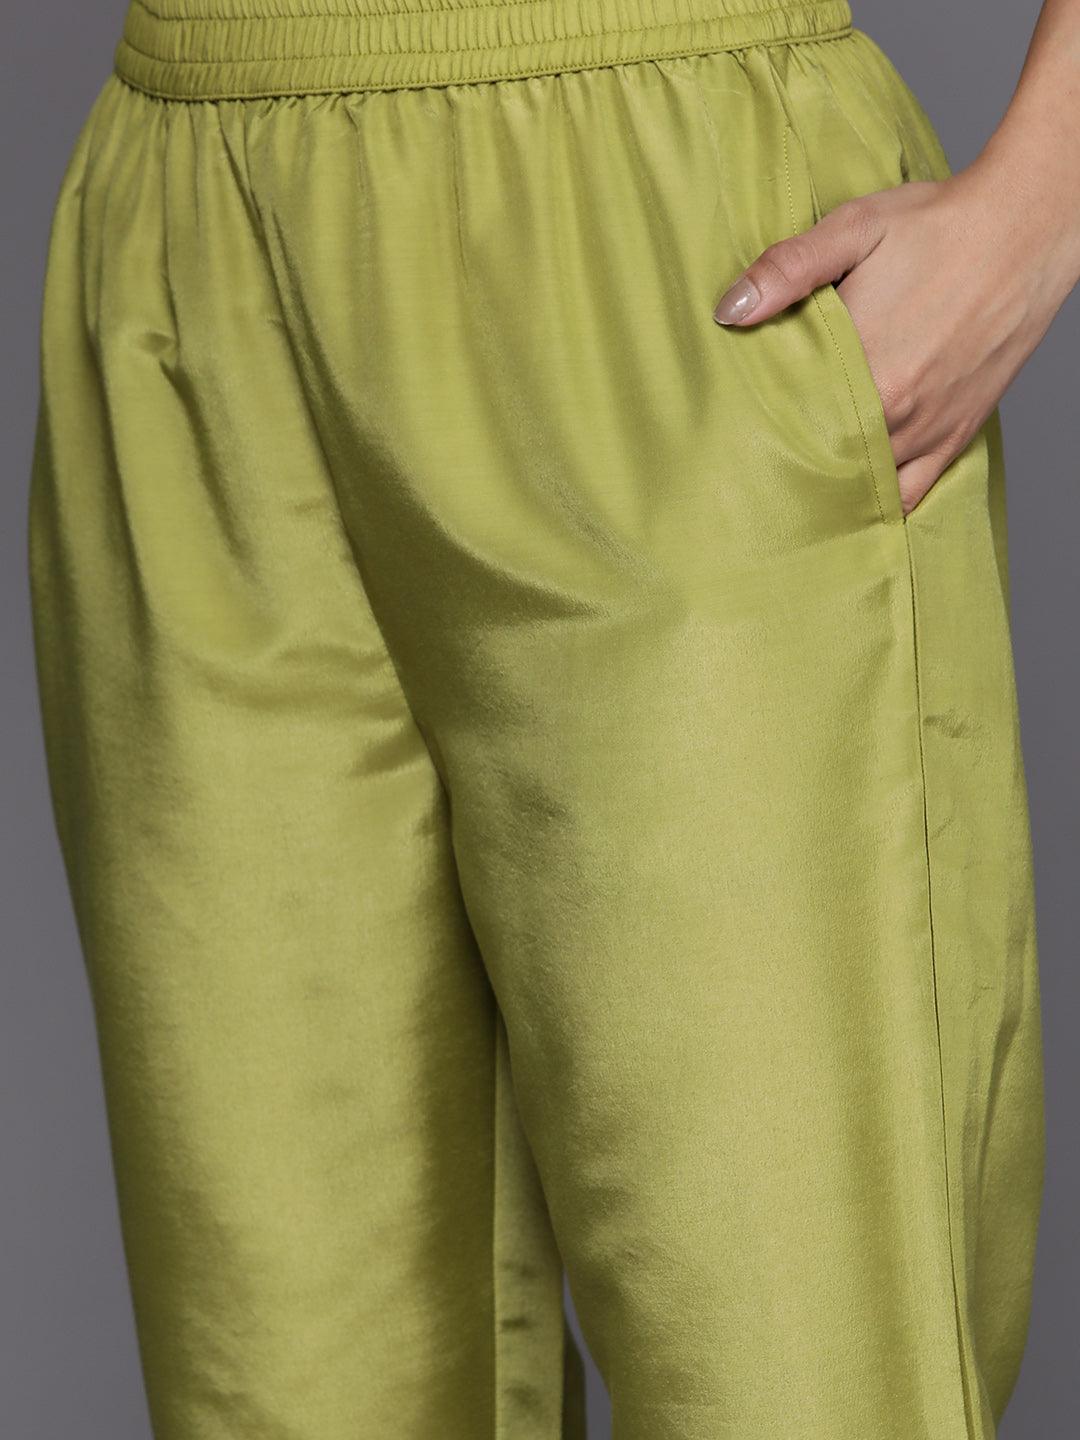 Green Embroidered Silk Blend Straight Kurta With Trousers & Dupatta